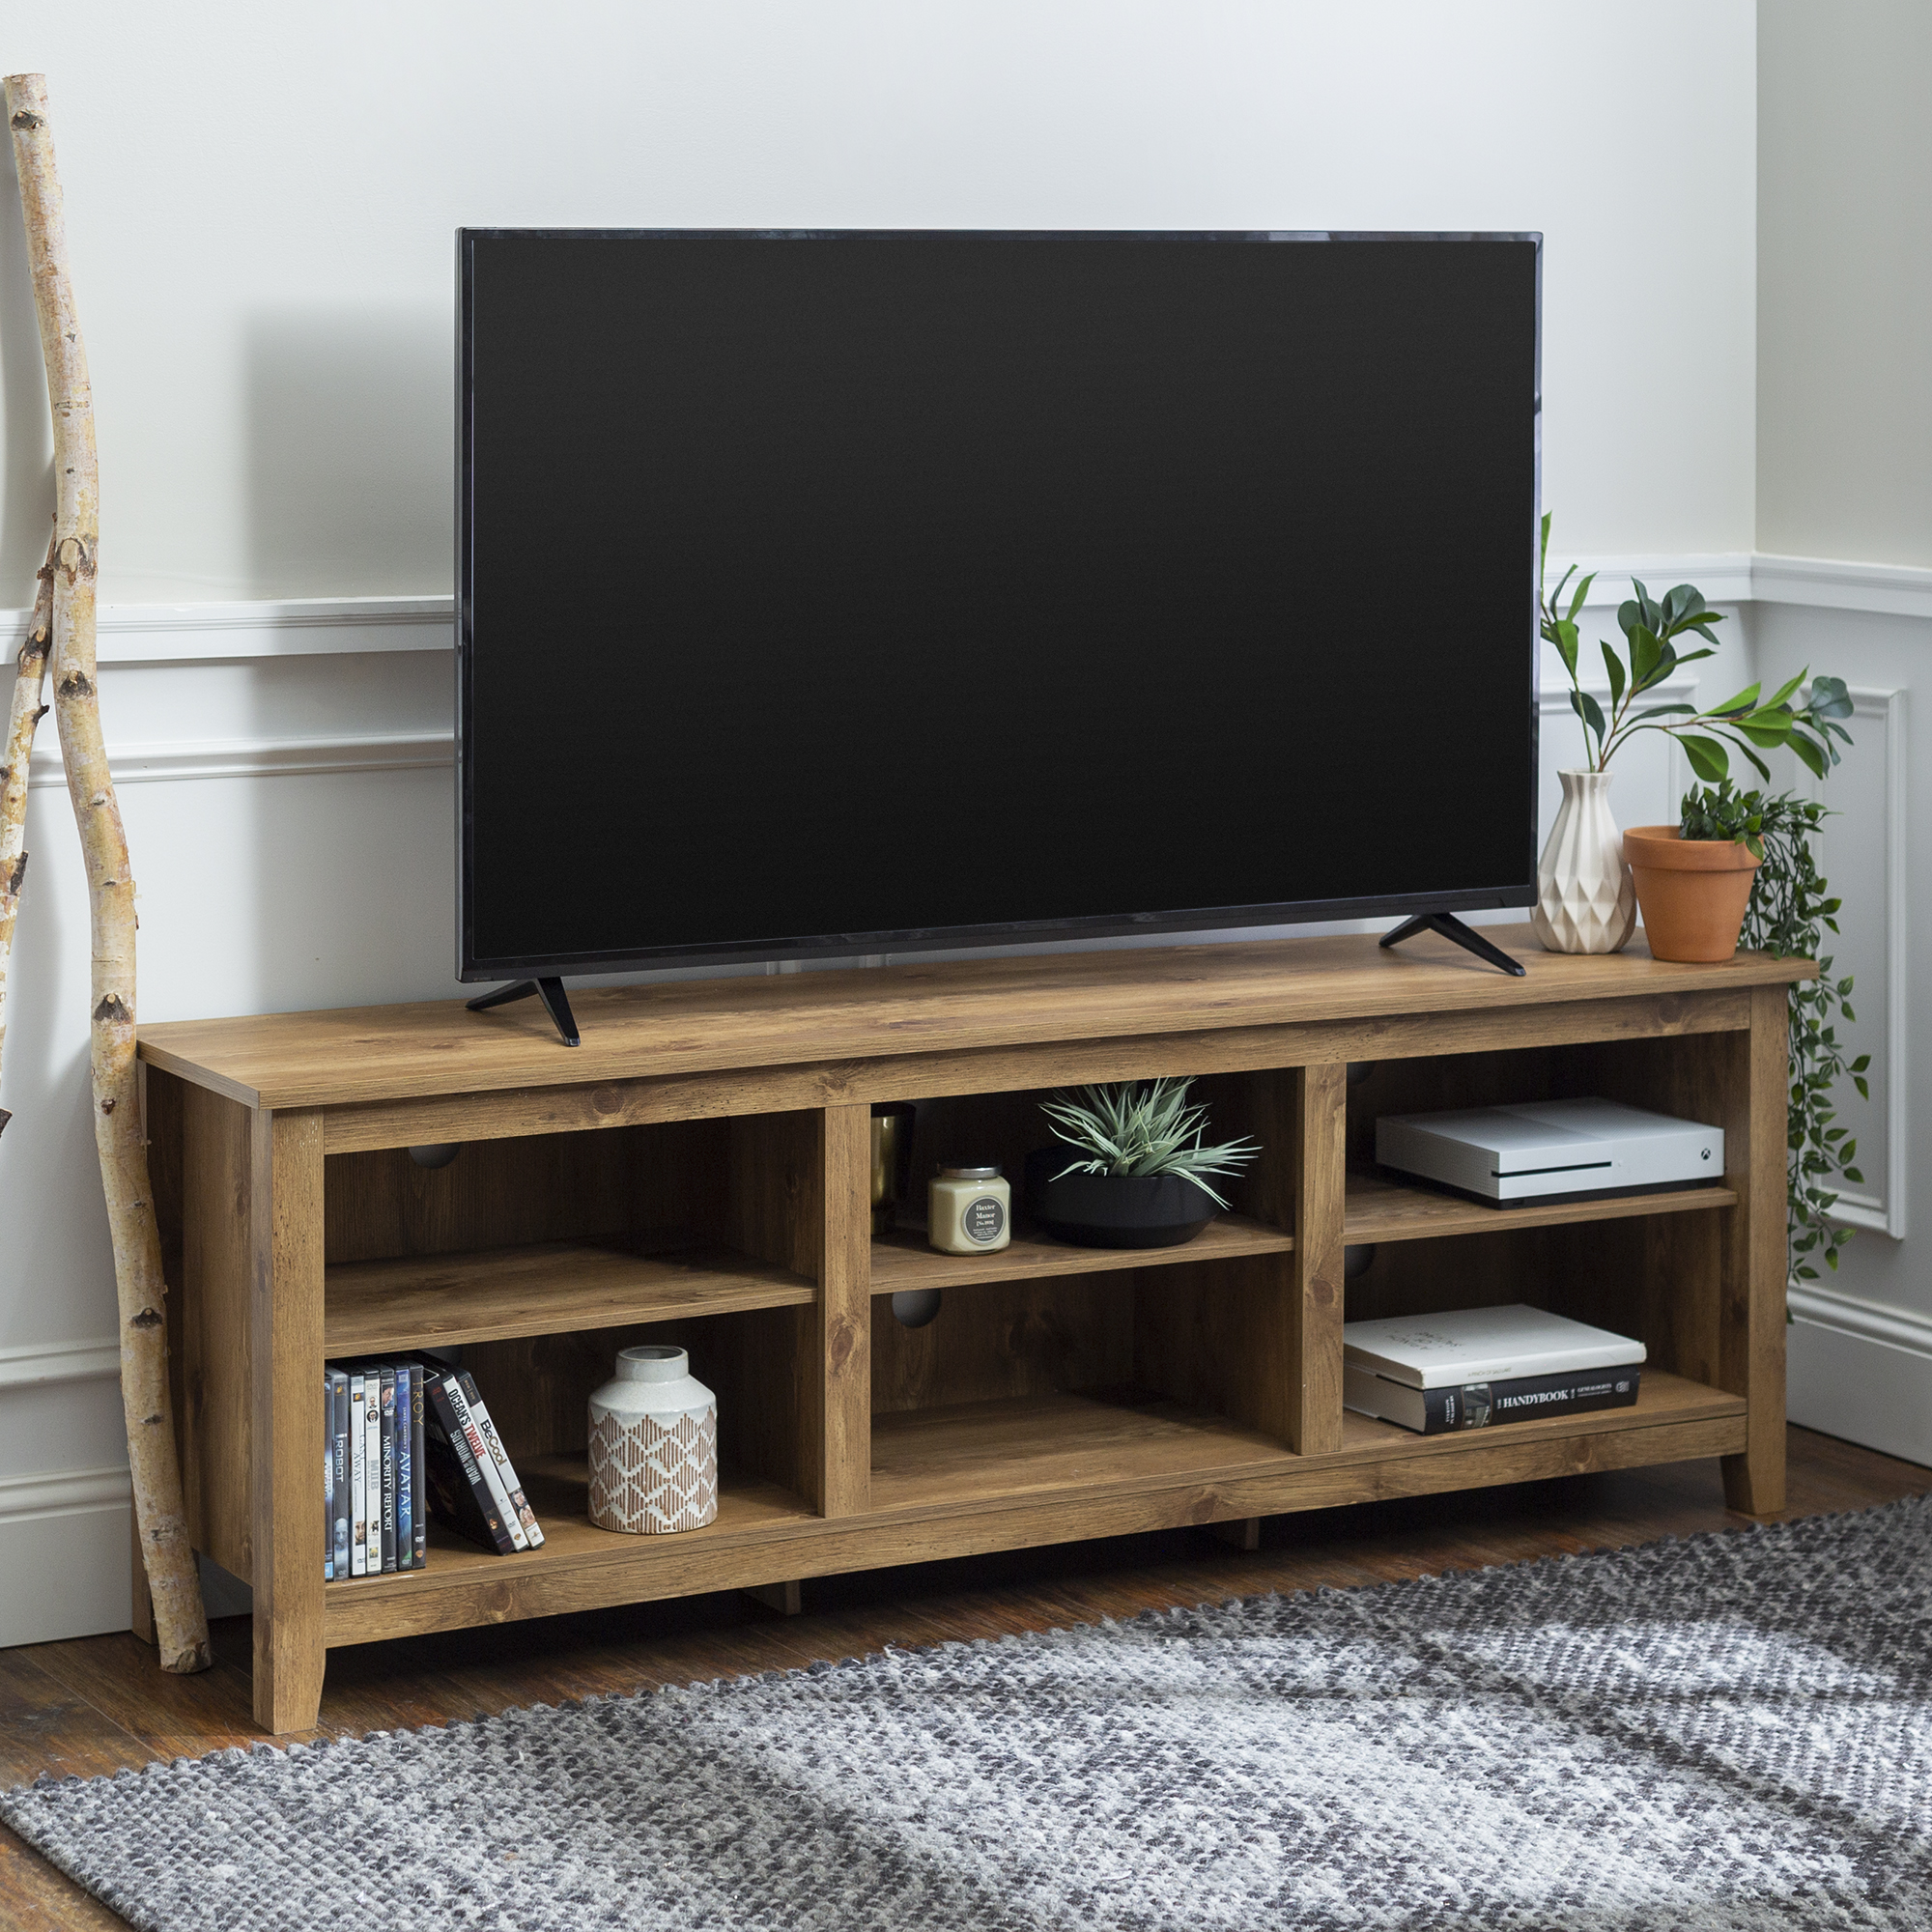 Woven Paths Open Storage TV Stand for TVs up to 80", Barnwood - image 1 of 12